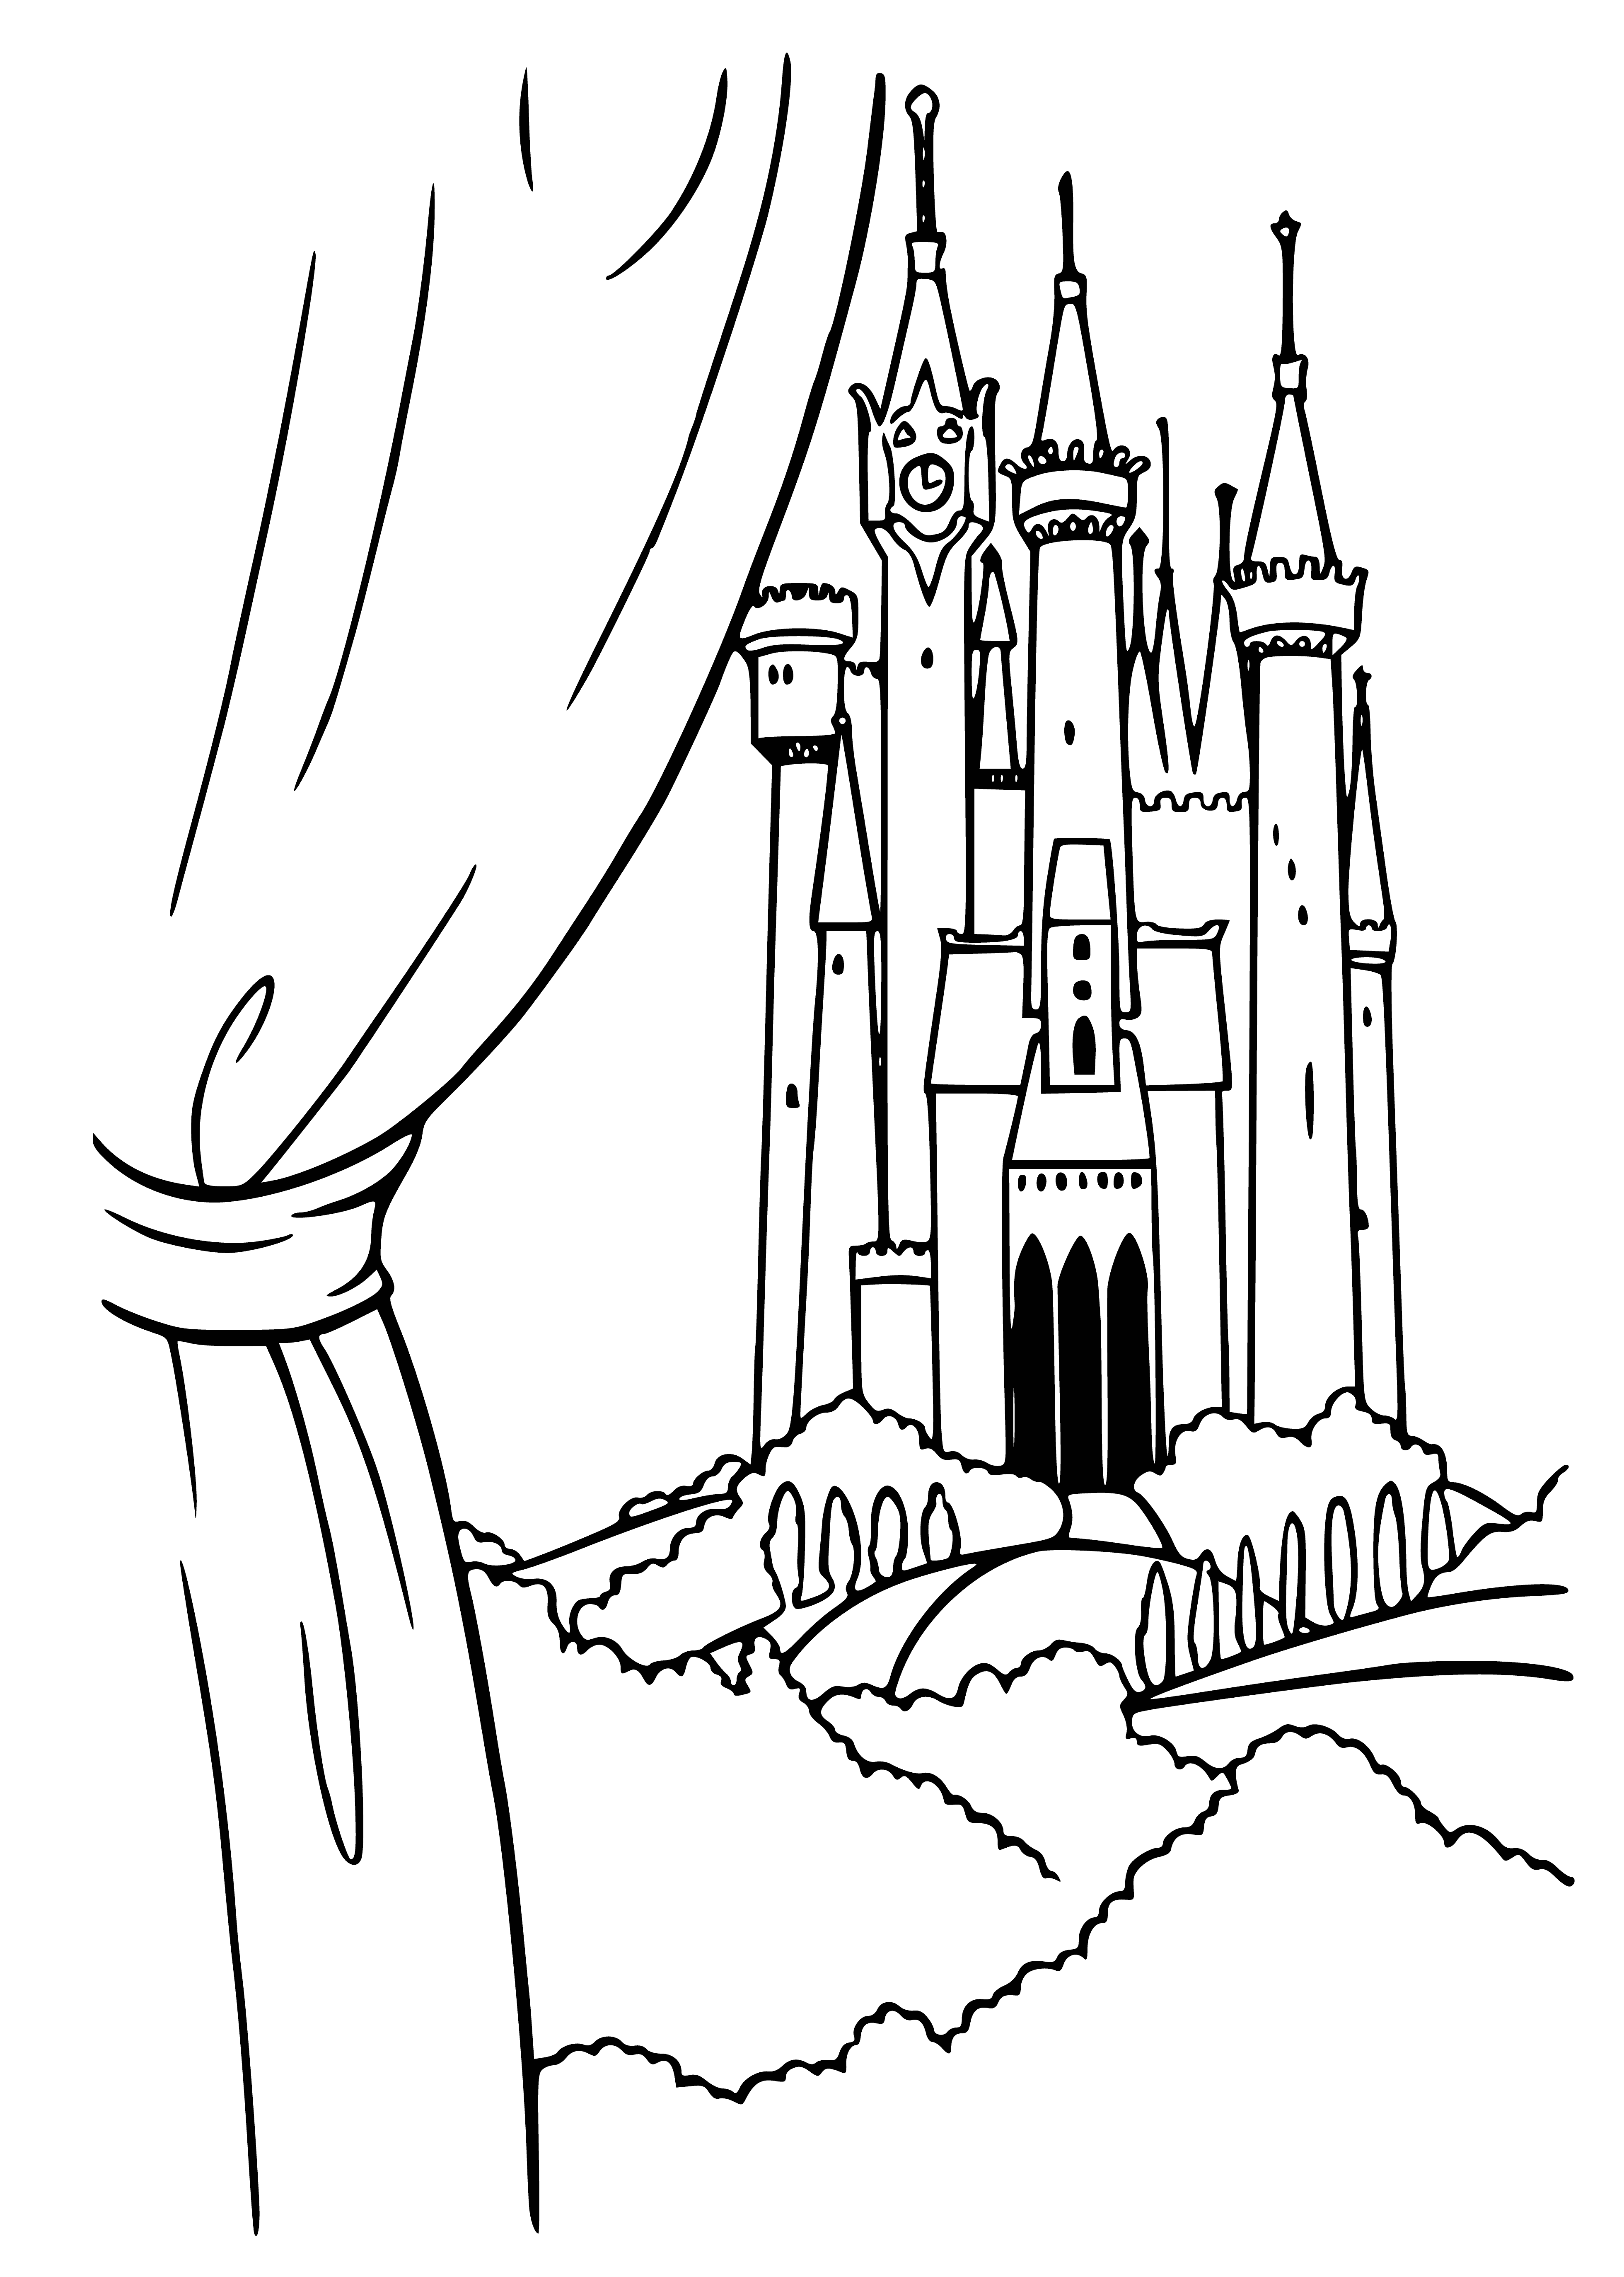 coloring page: Girl in rags kneels, scrubbing pot in front of castle with people milling around.